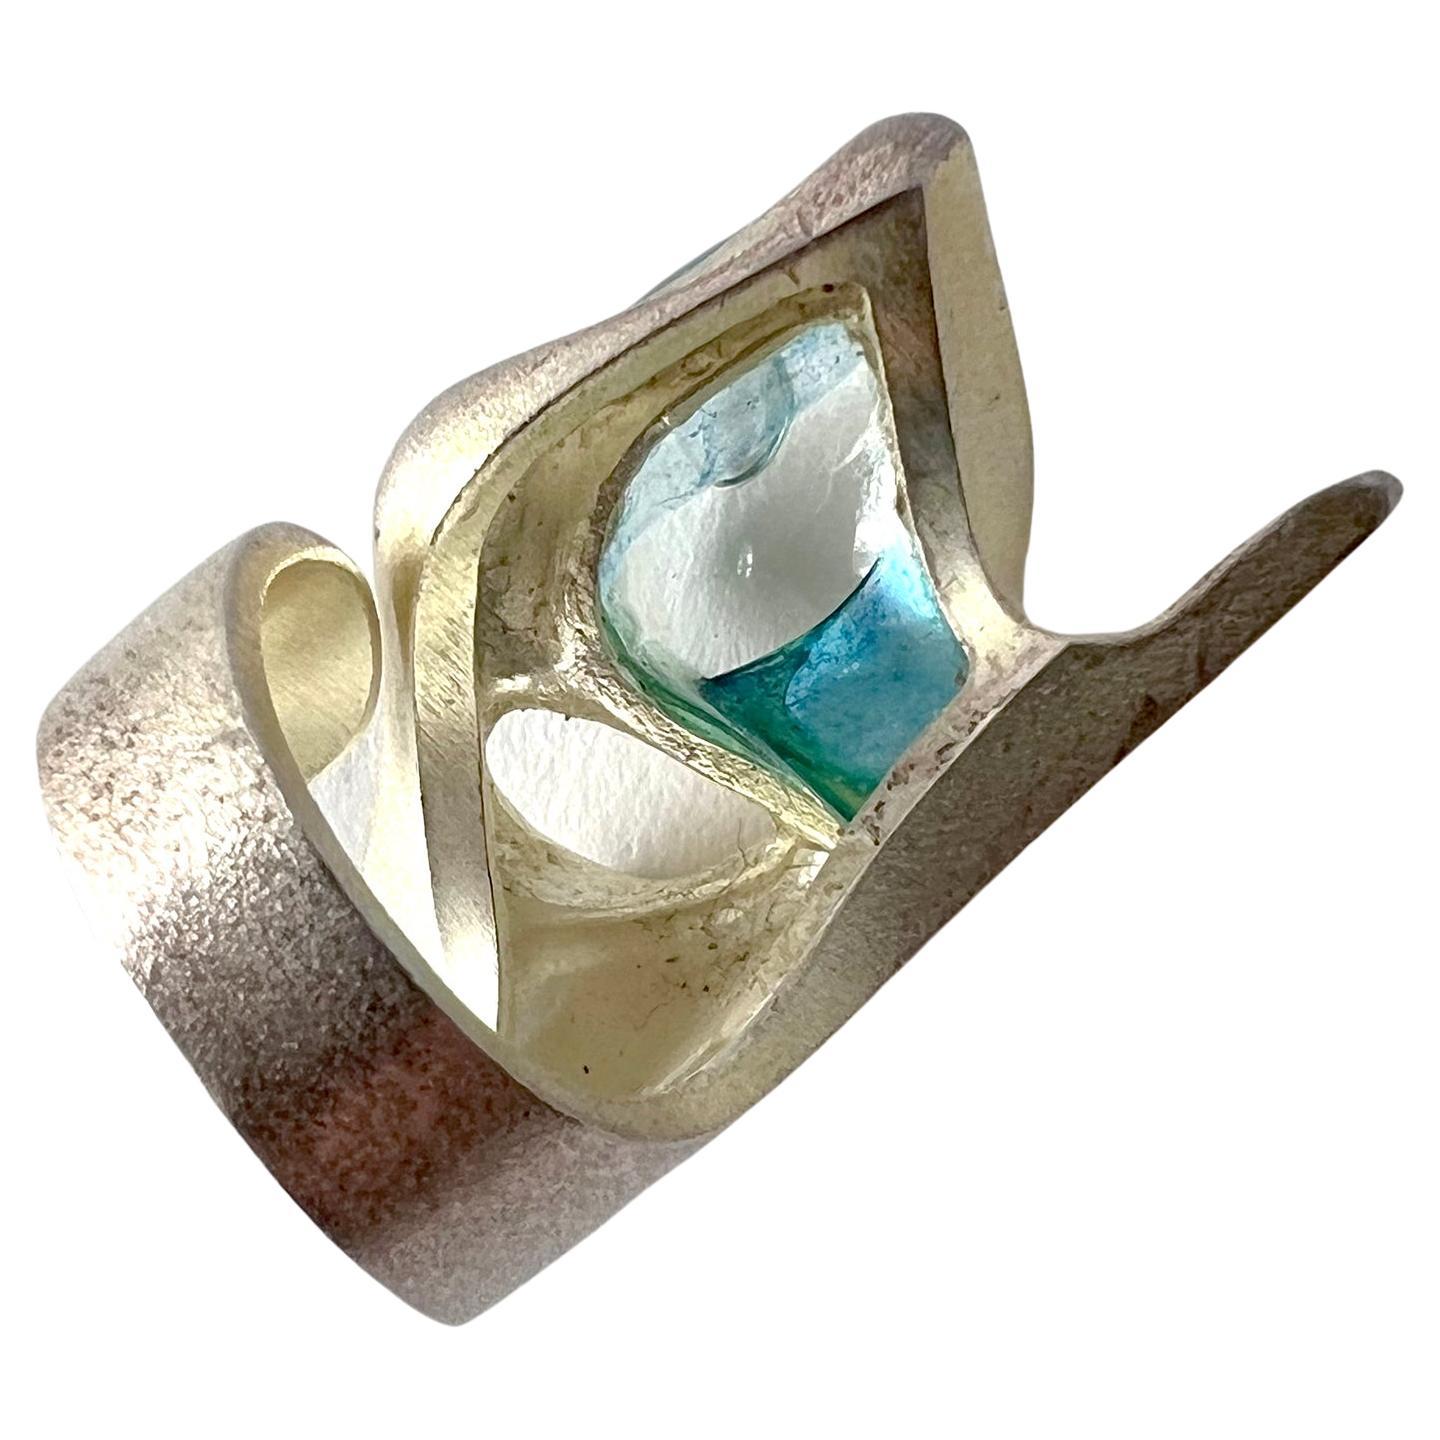 Bjorn Weckstrom for Lapponia sterling silver with blue acrylic 'stone' entitled Kohoutek.  Ring was first designed in 1973, this is a reissue created in the year 2000.  Signed with Finnish Hallmarks, Lapponia, BW, Y8 (2000) and is a size 7.25 - 7.5.